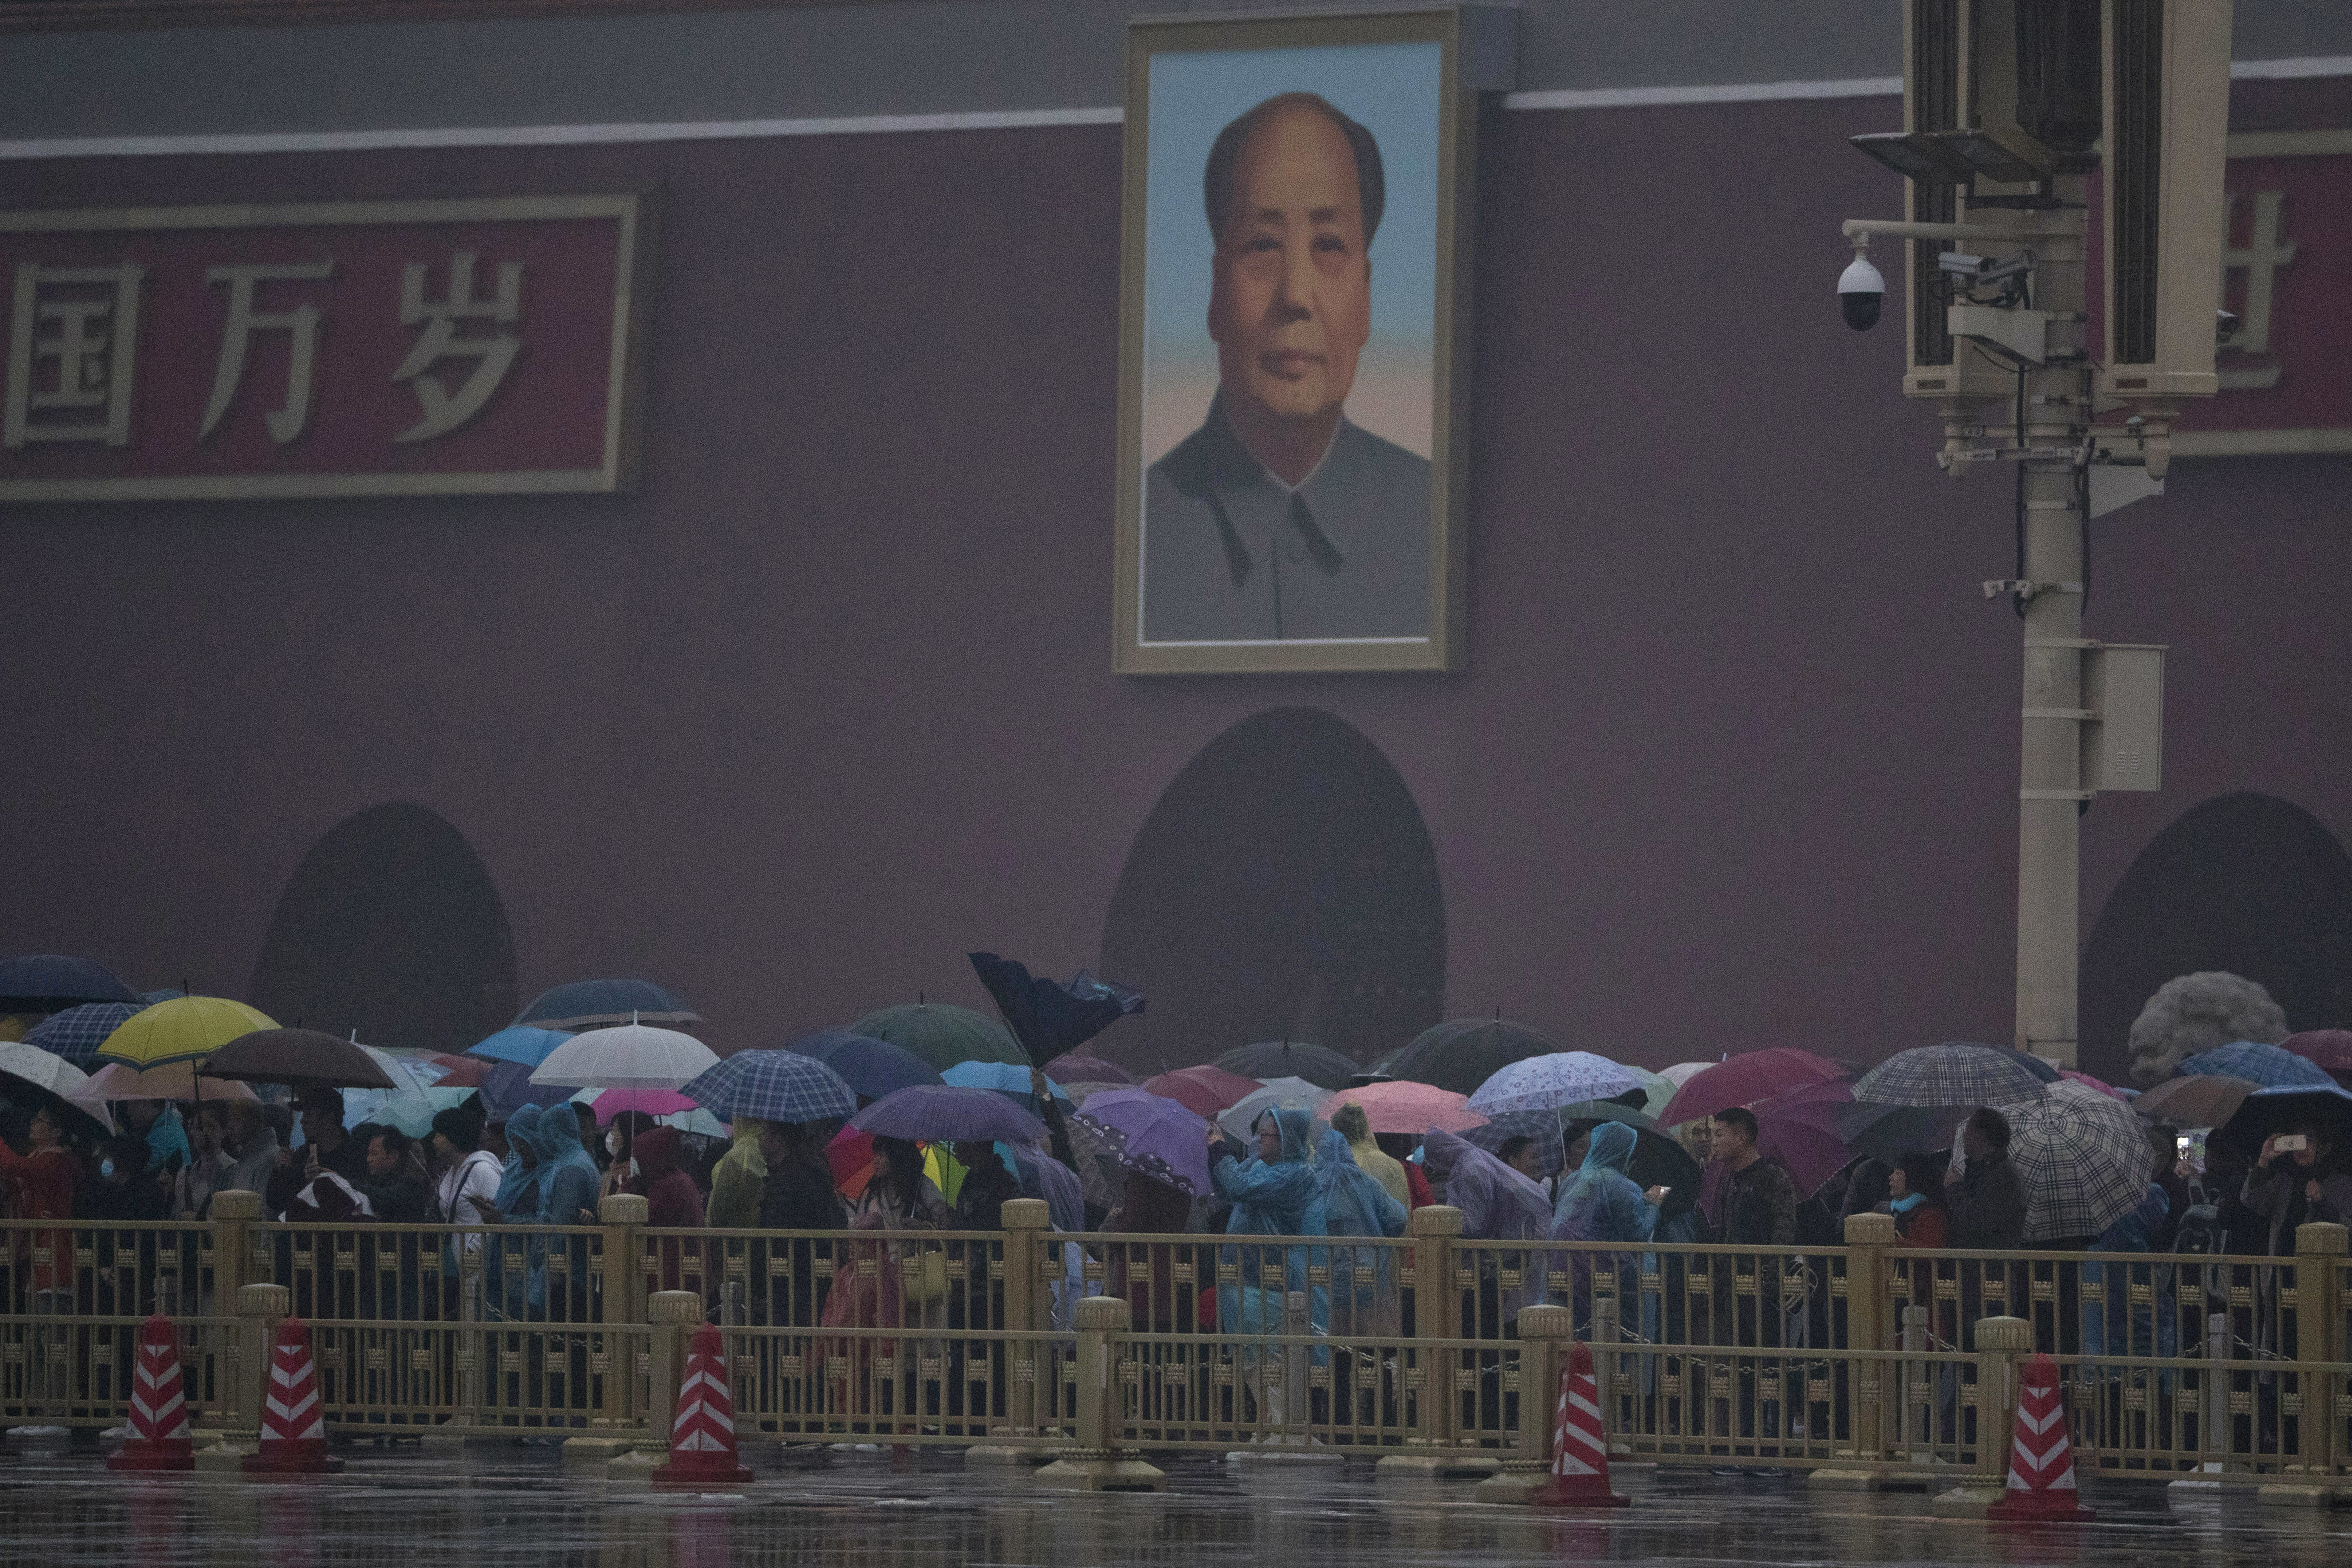 Tourists gather near the portrait of Mao Zedong to watch the flag raising ceremony on the day of the 19th Party Congress in Beijing, China, Wednesday, Oct. 18, 2017. Chinese President Xi Jinping on Wednesday urged a reinvigorated Communist Party to take on a more forceful role in society and economic development to better address 